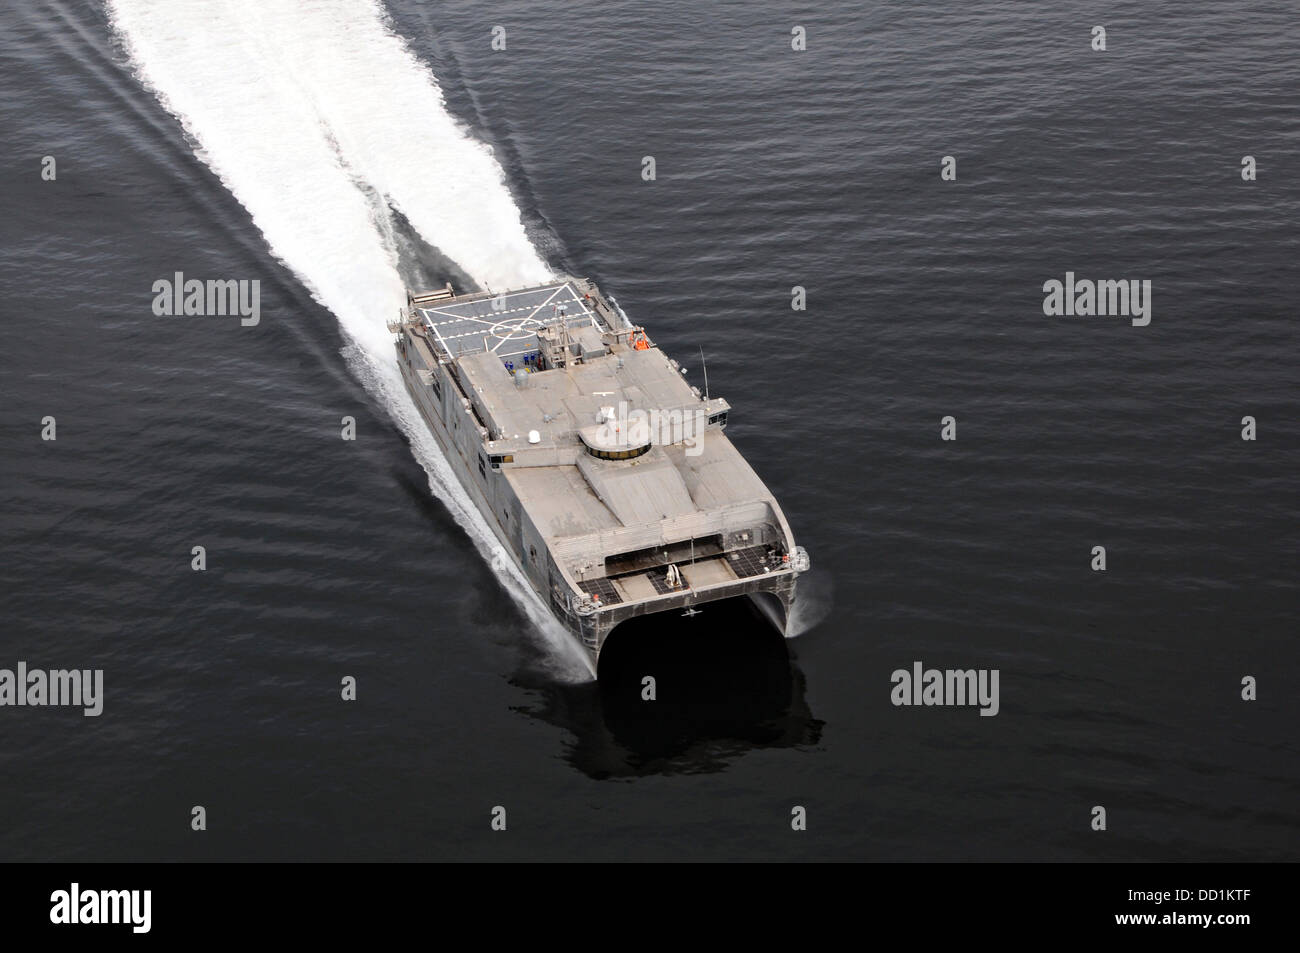 US Navy Military Sealift Command joint high-speed vessel USNS Spearhead conducts high-speed trials August 20, 2013 off the coast of Virginia. The USNS Spearhead reached speeds of 40 knots during the testing. Stock Photo